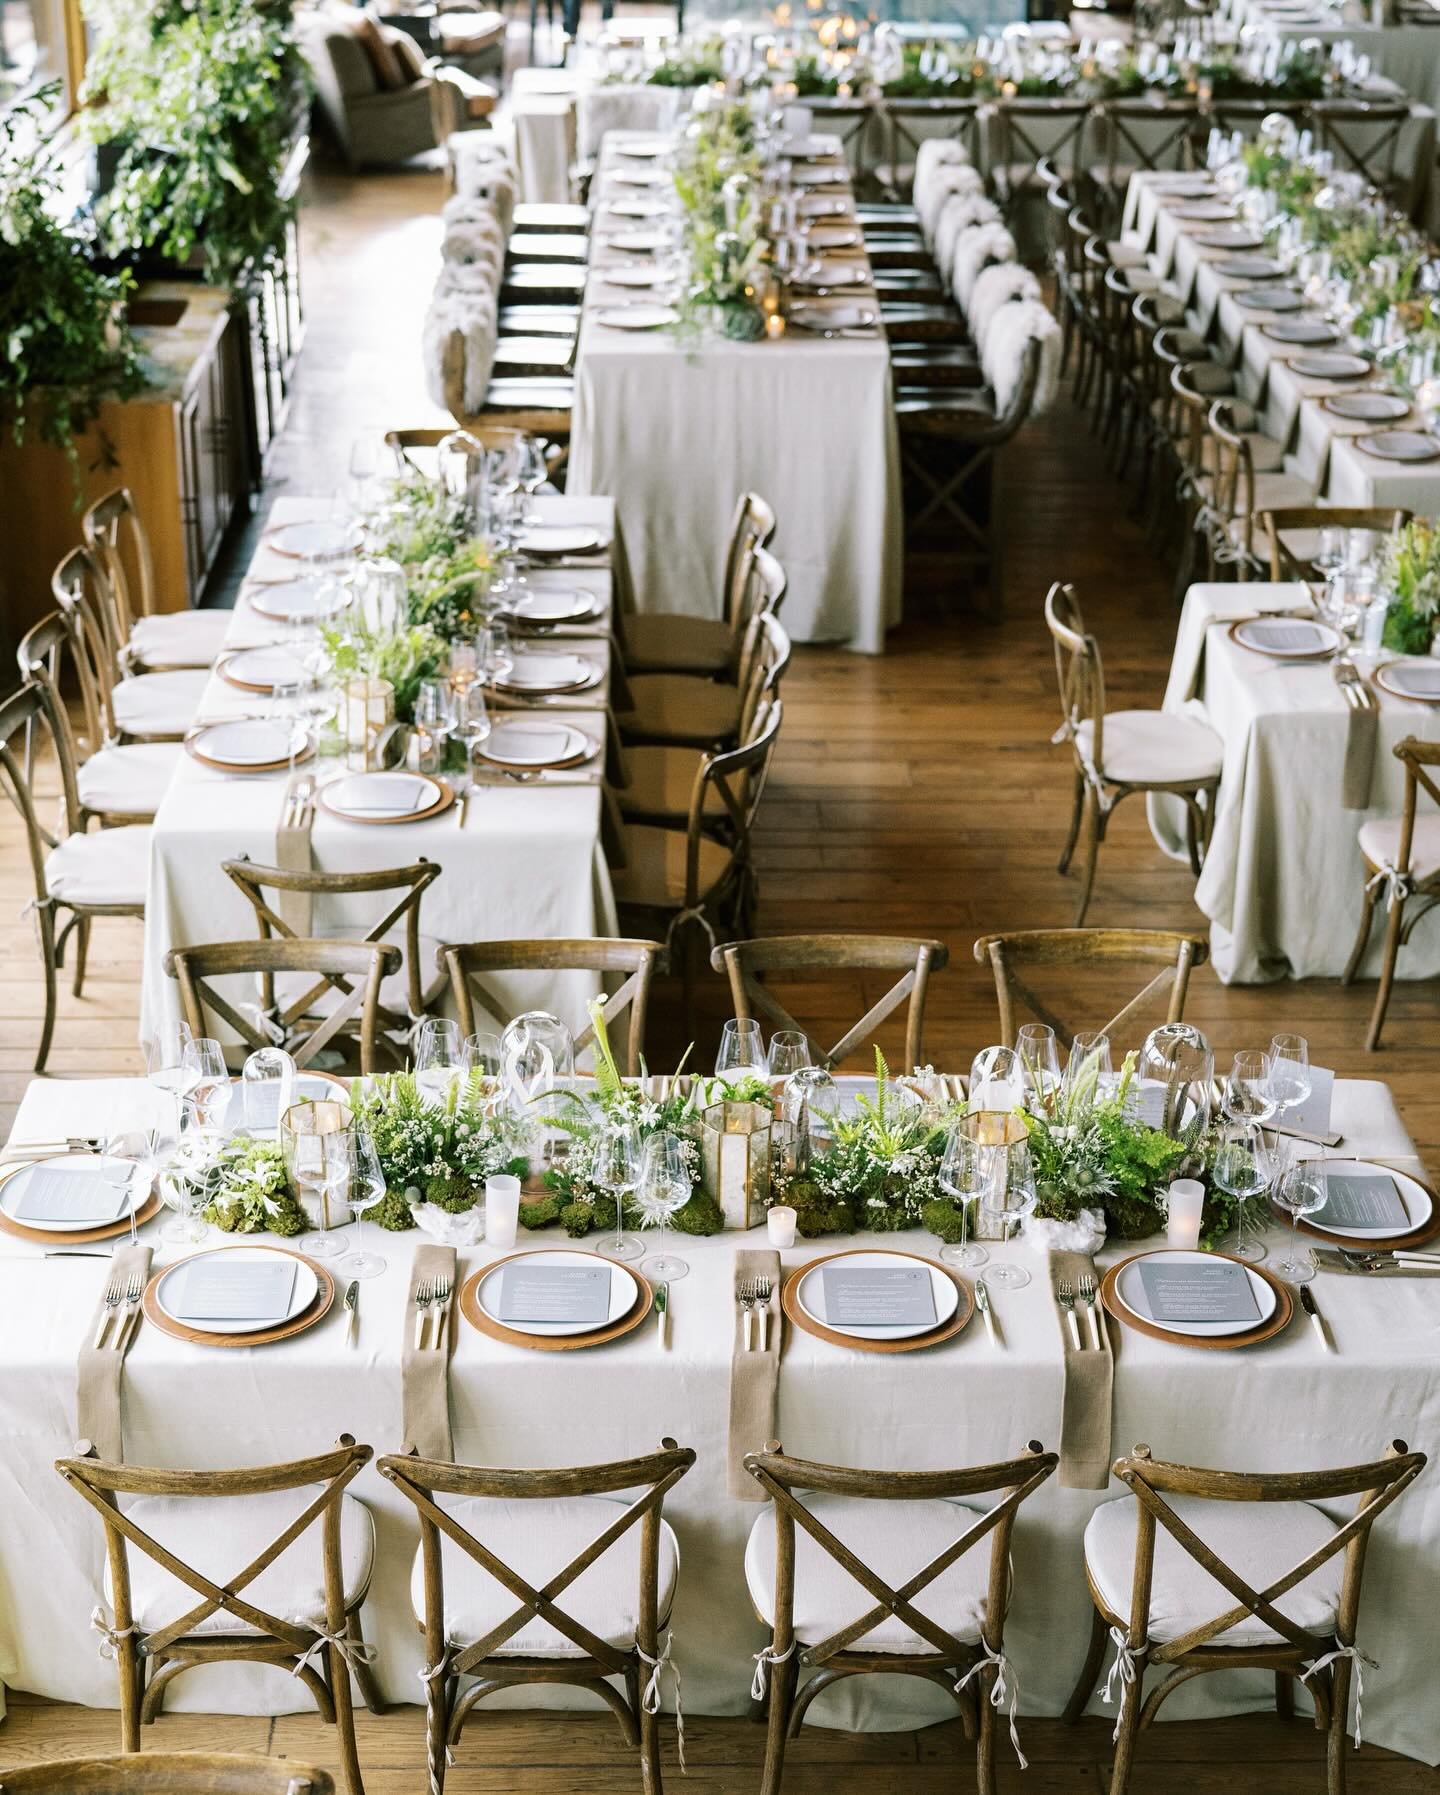 A SIT-DOWN FOR LOVED ONES.

This rehearsal dinner perfectly balanced lavish refinement with comforting charm, making it the perfect place for loved ones to gather and enjoy a meal. Pine greenery sat amongst candlelight centerpieces, breathing life in